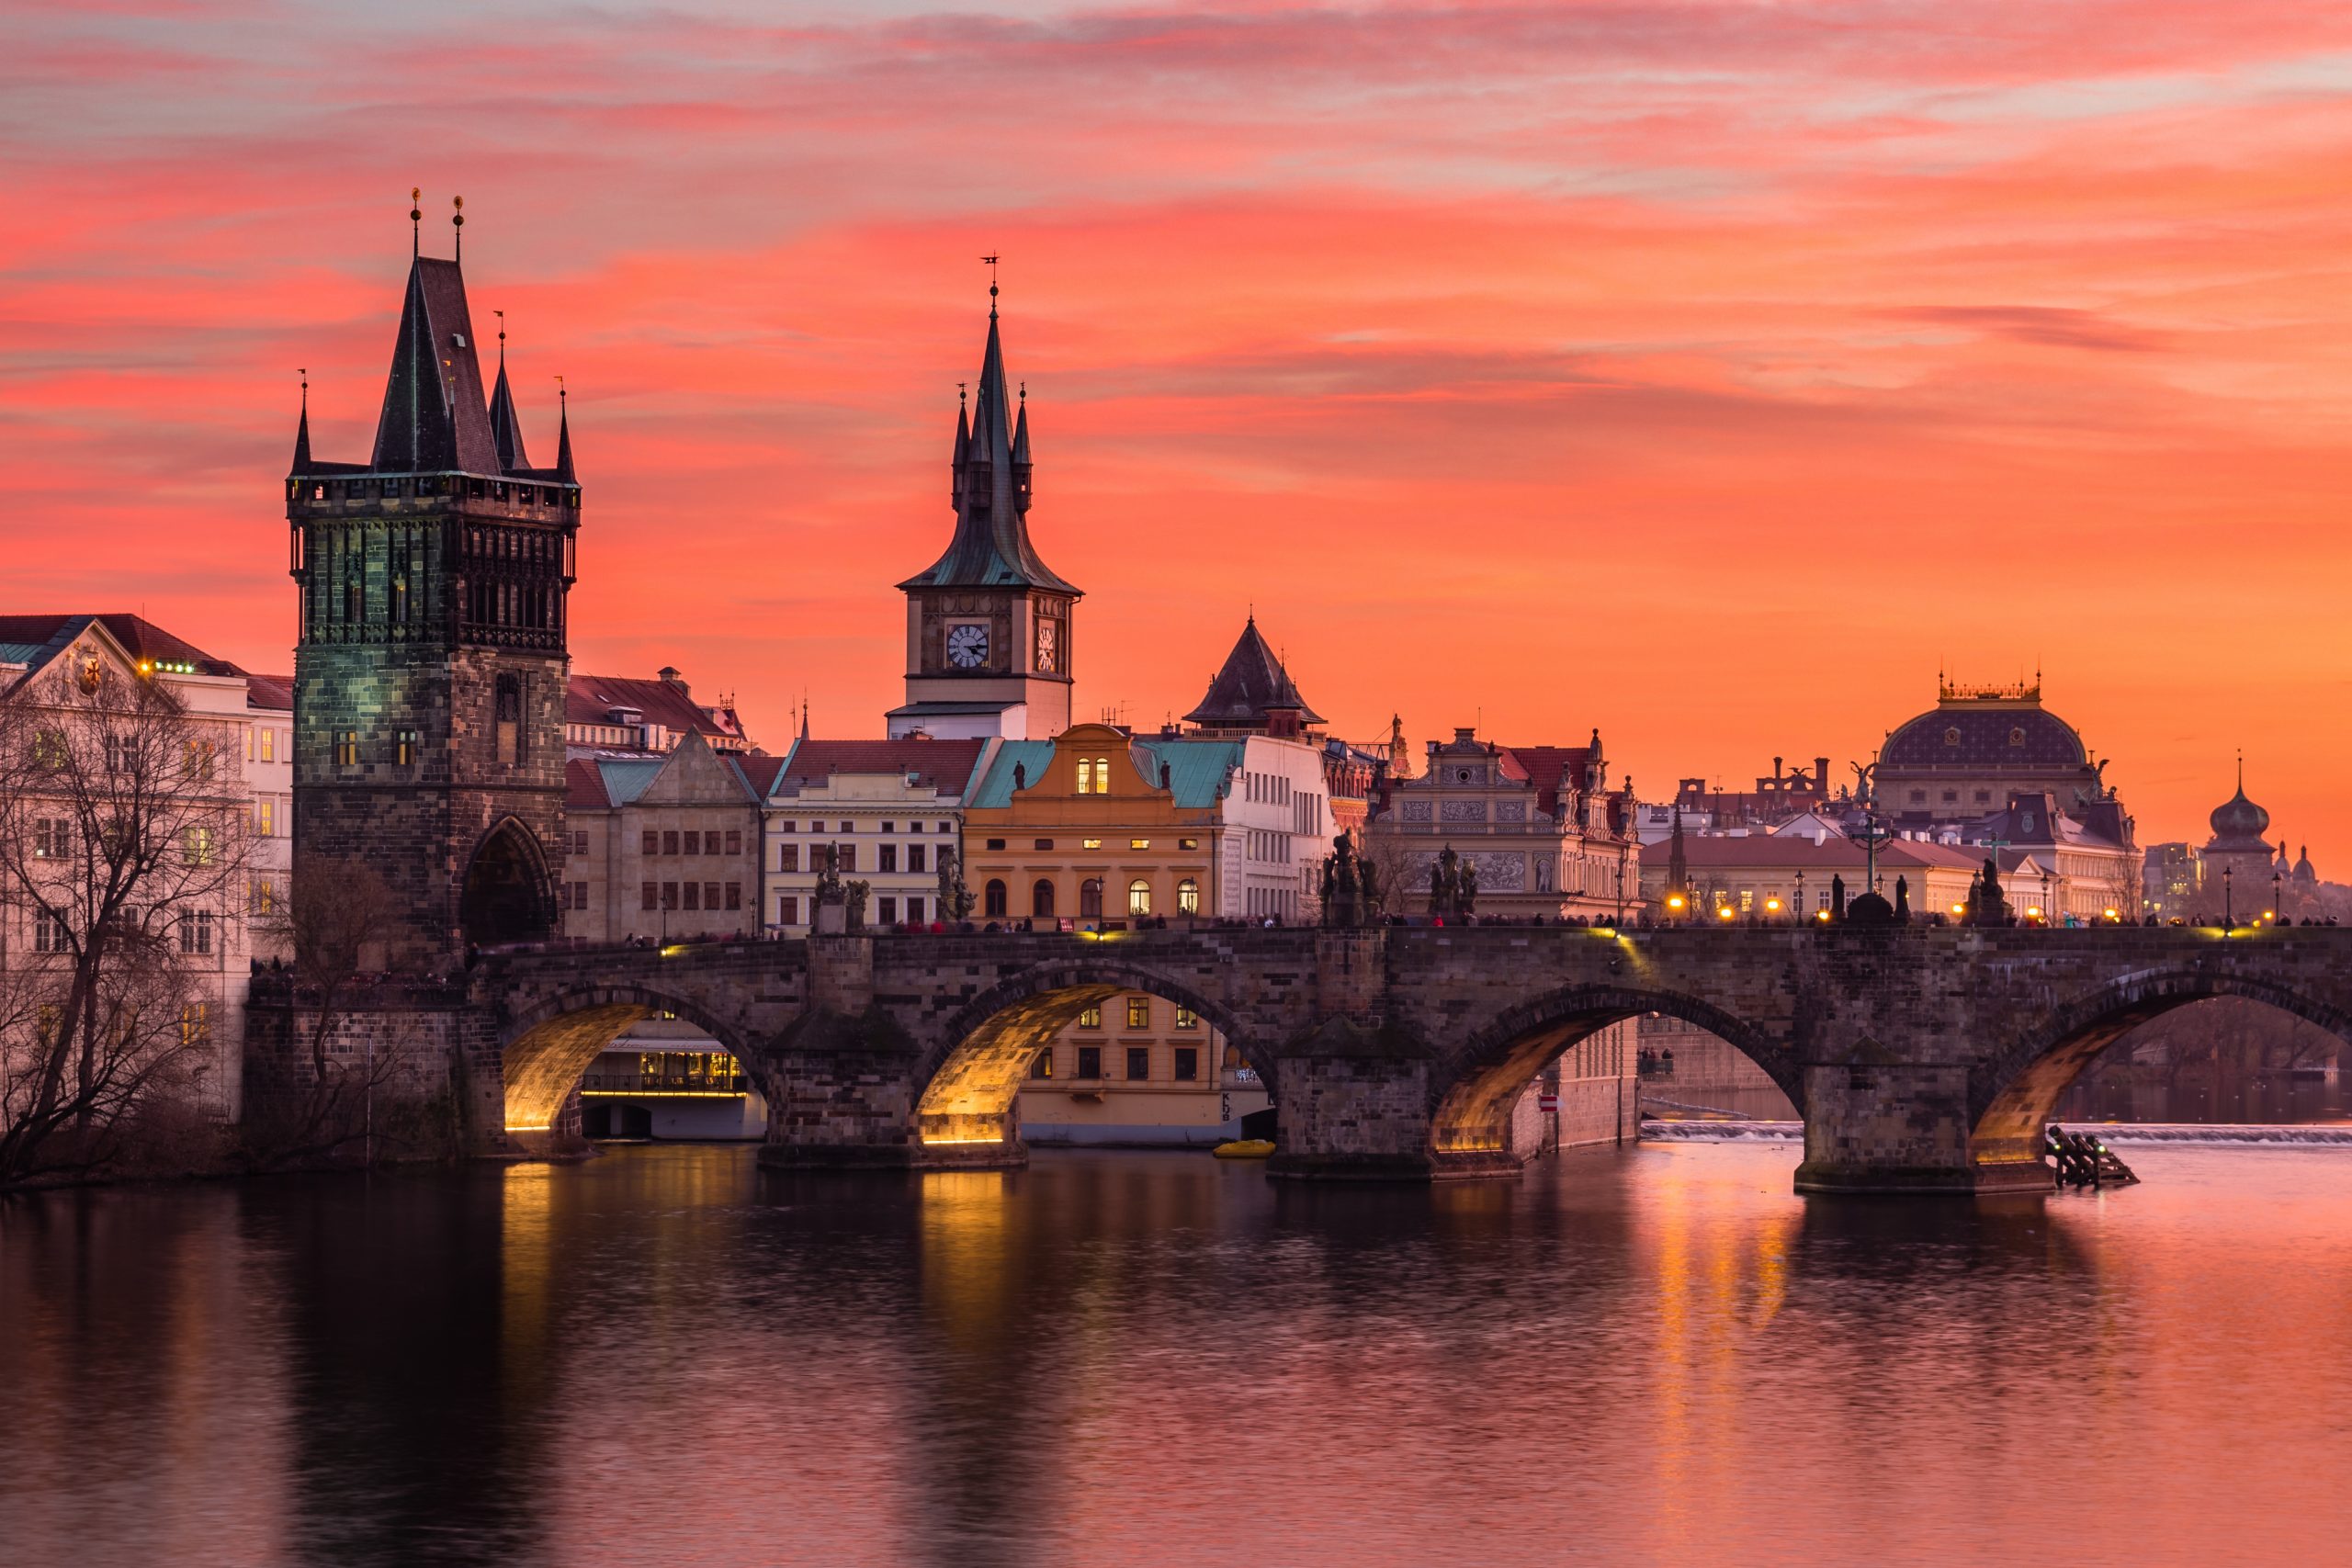 In the Czech Republic, Prague is considered one of the best Christmas towns to visit at this time of year. 